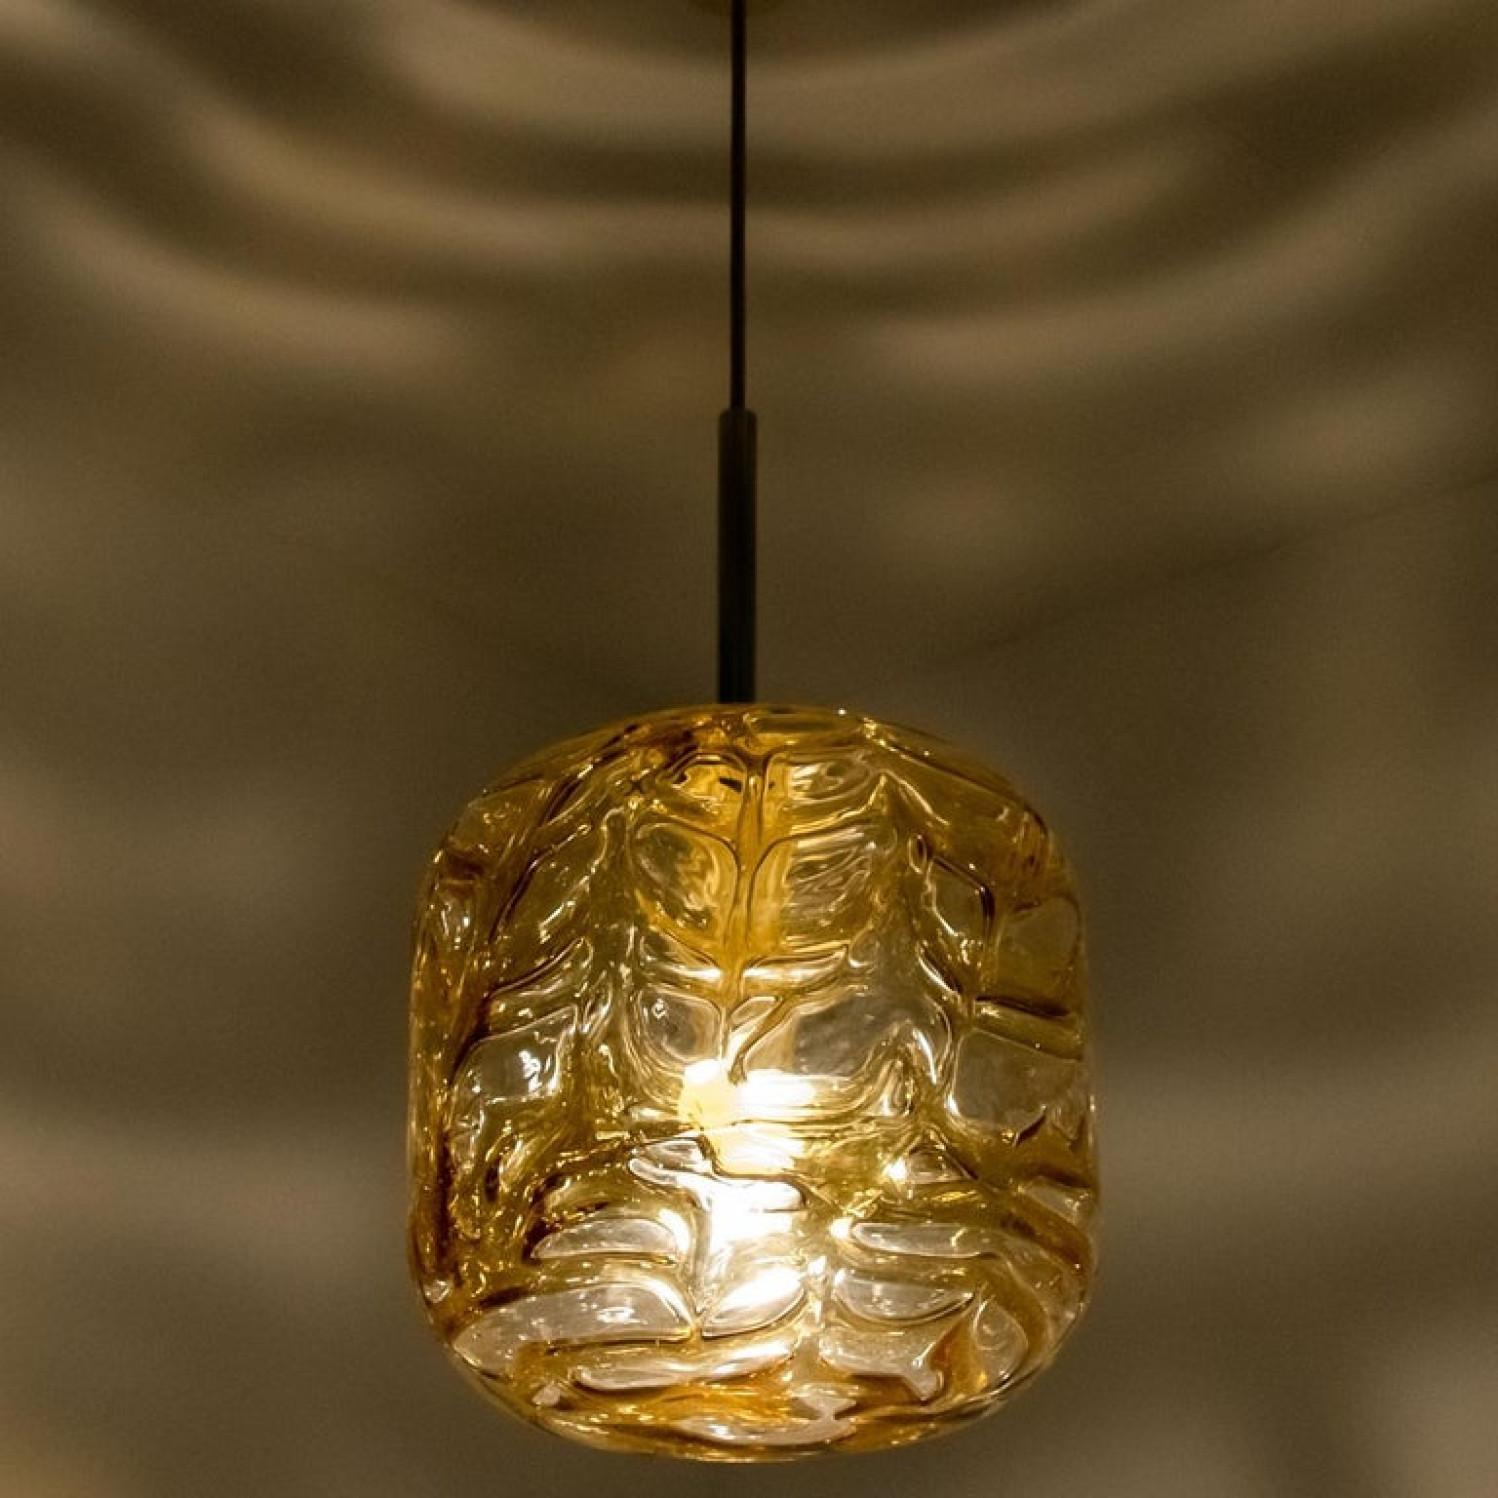 Exceptional Pair of Amber Murano Glass Pendant Lights Venini Style, 1970 In Excellent Condition For Sale In Rijssen, NL